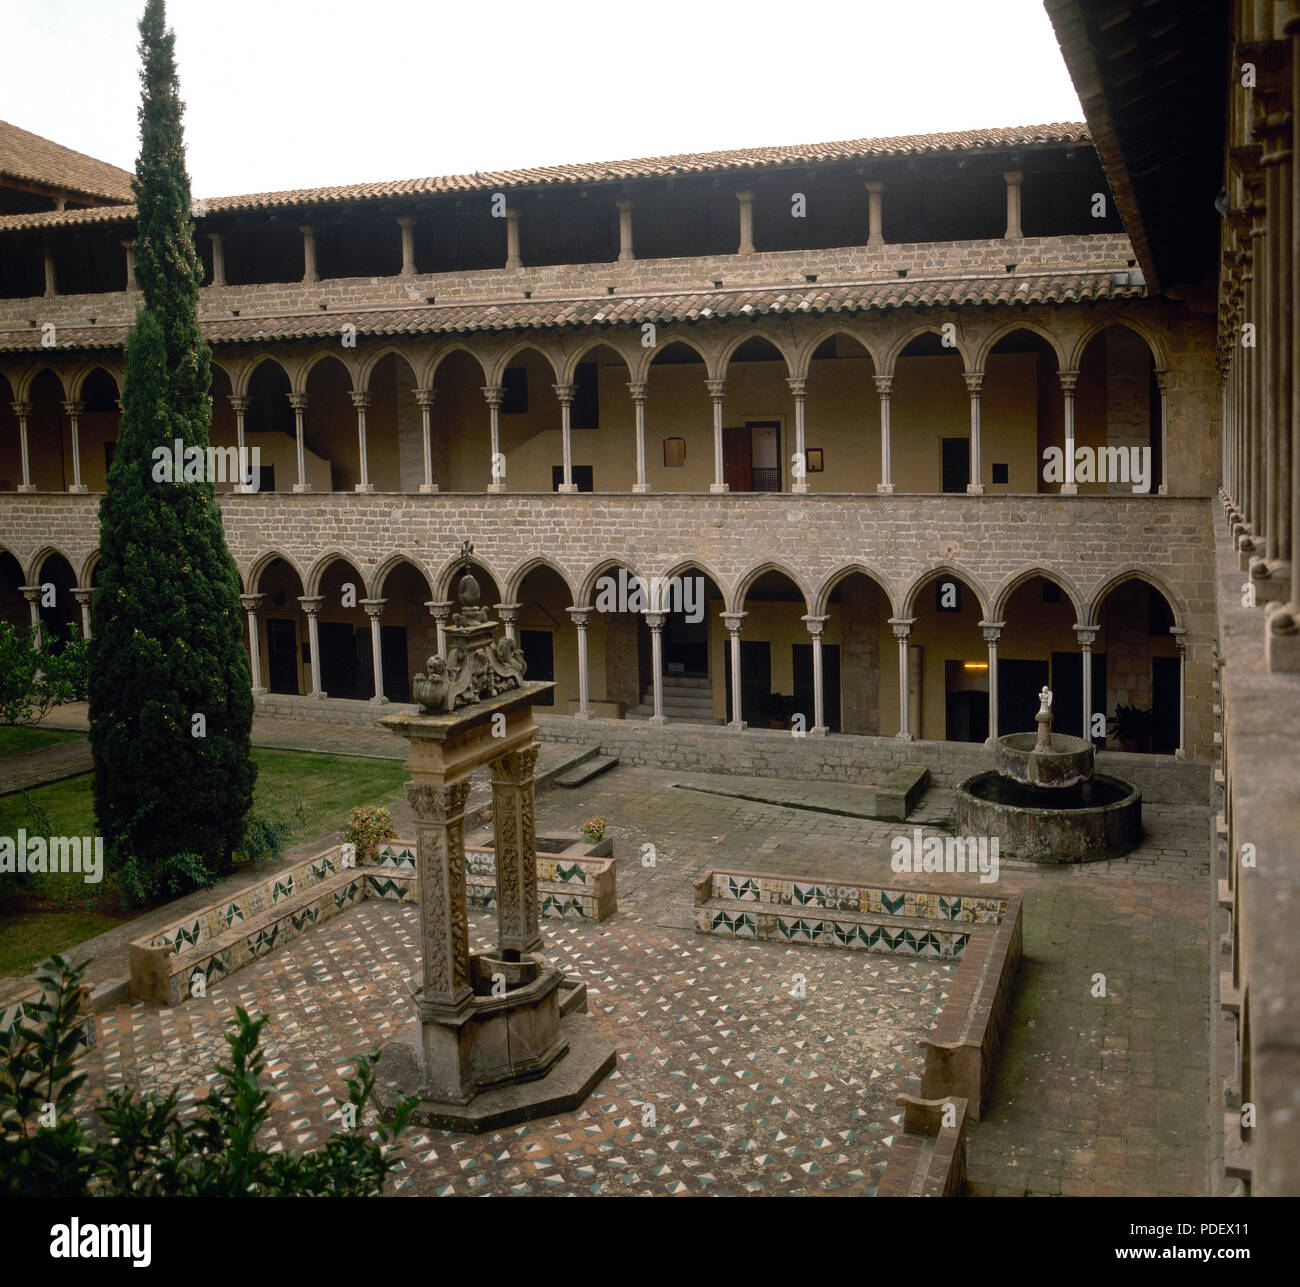 Royal Monastery of Saint Mary of Pedralbes. Founded in 14th century. Gothic cloister. Barcelona, Catalonia, Spain. Stock Photo